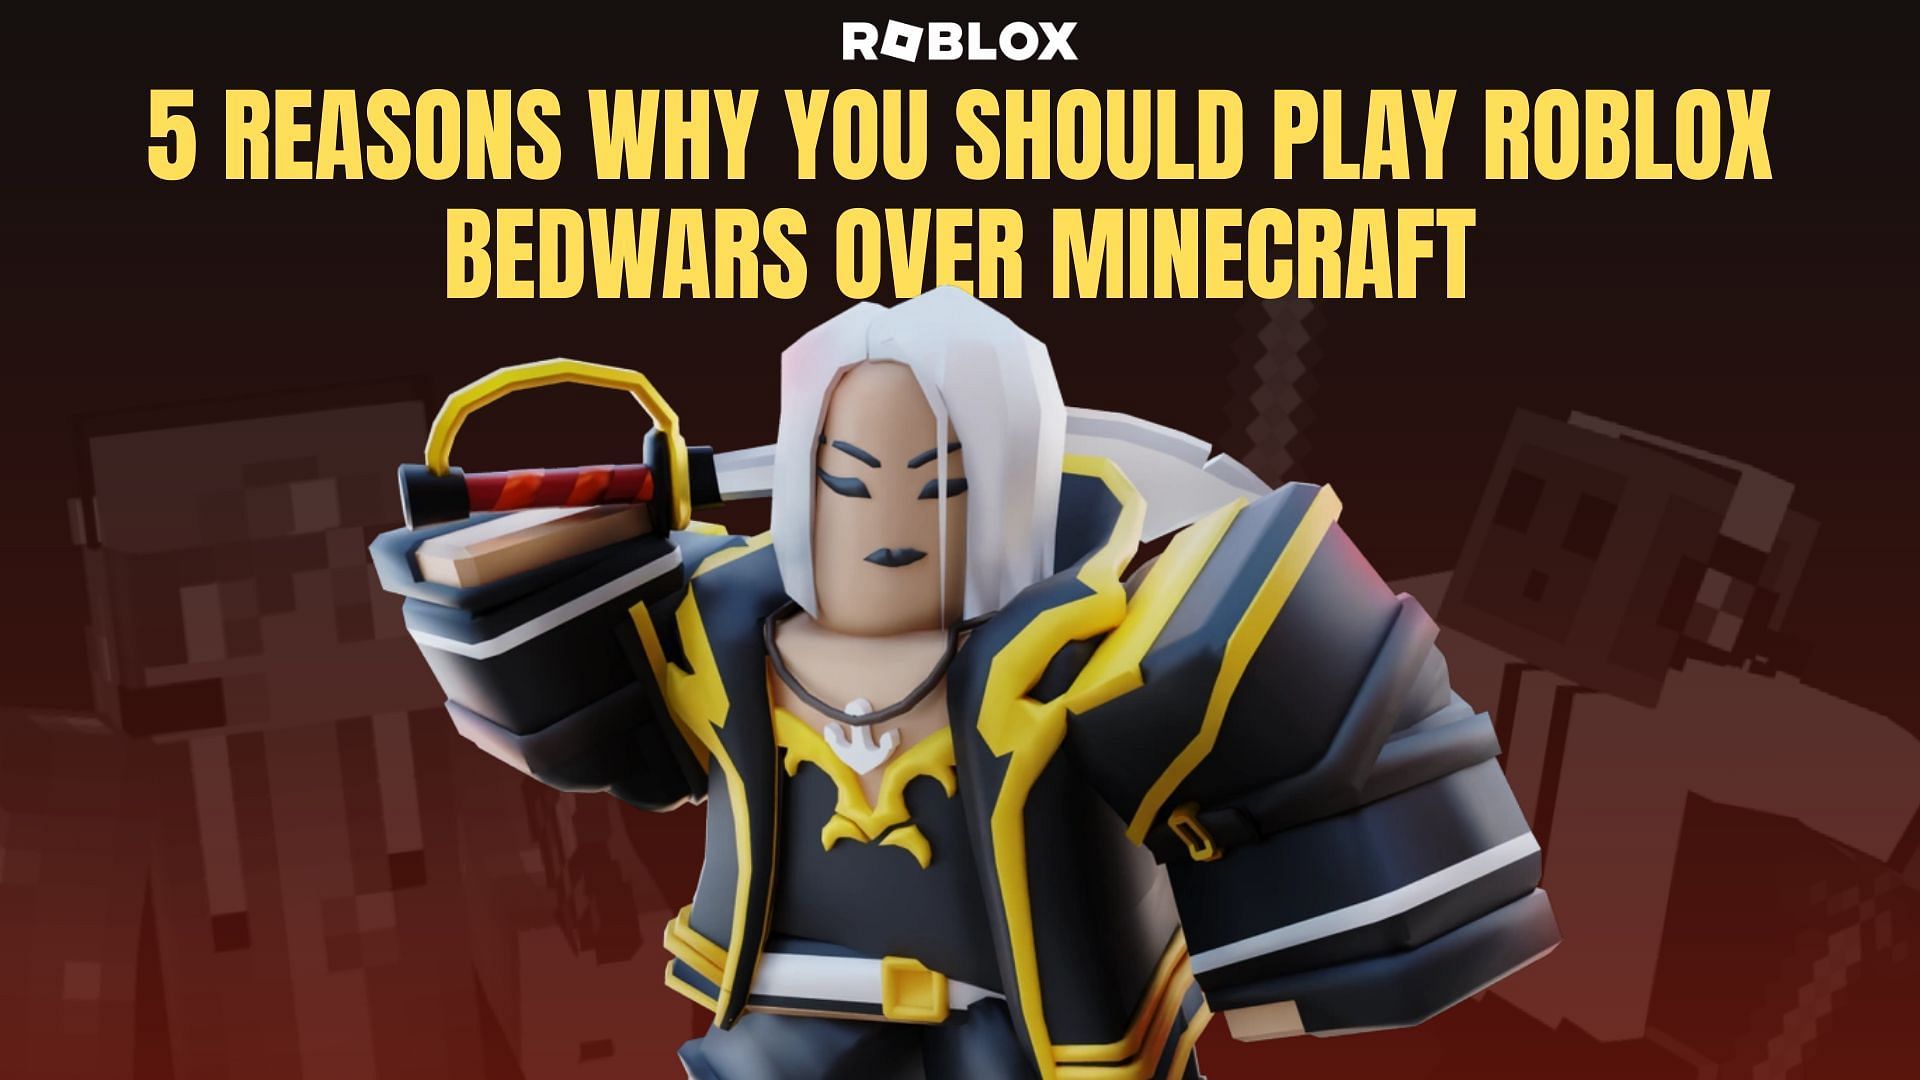 Why Roblox Bedwars is MILES better than Hypixel's Bedwars (quality